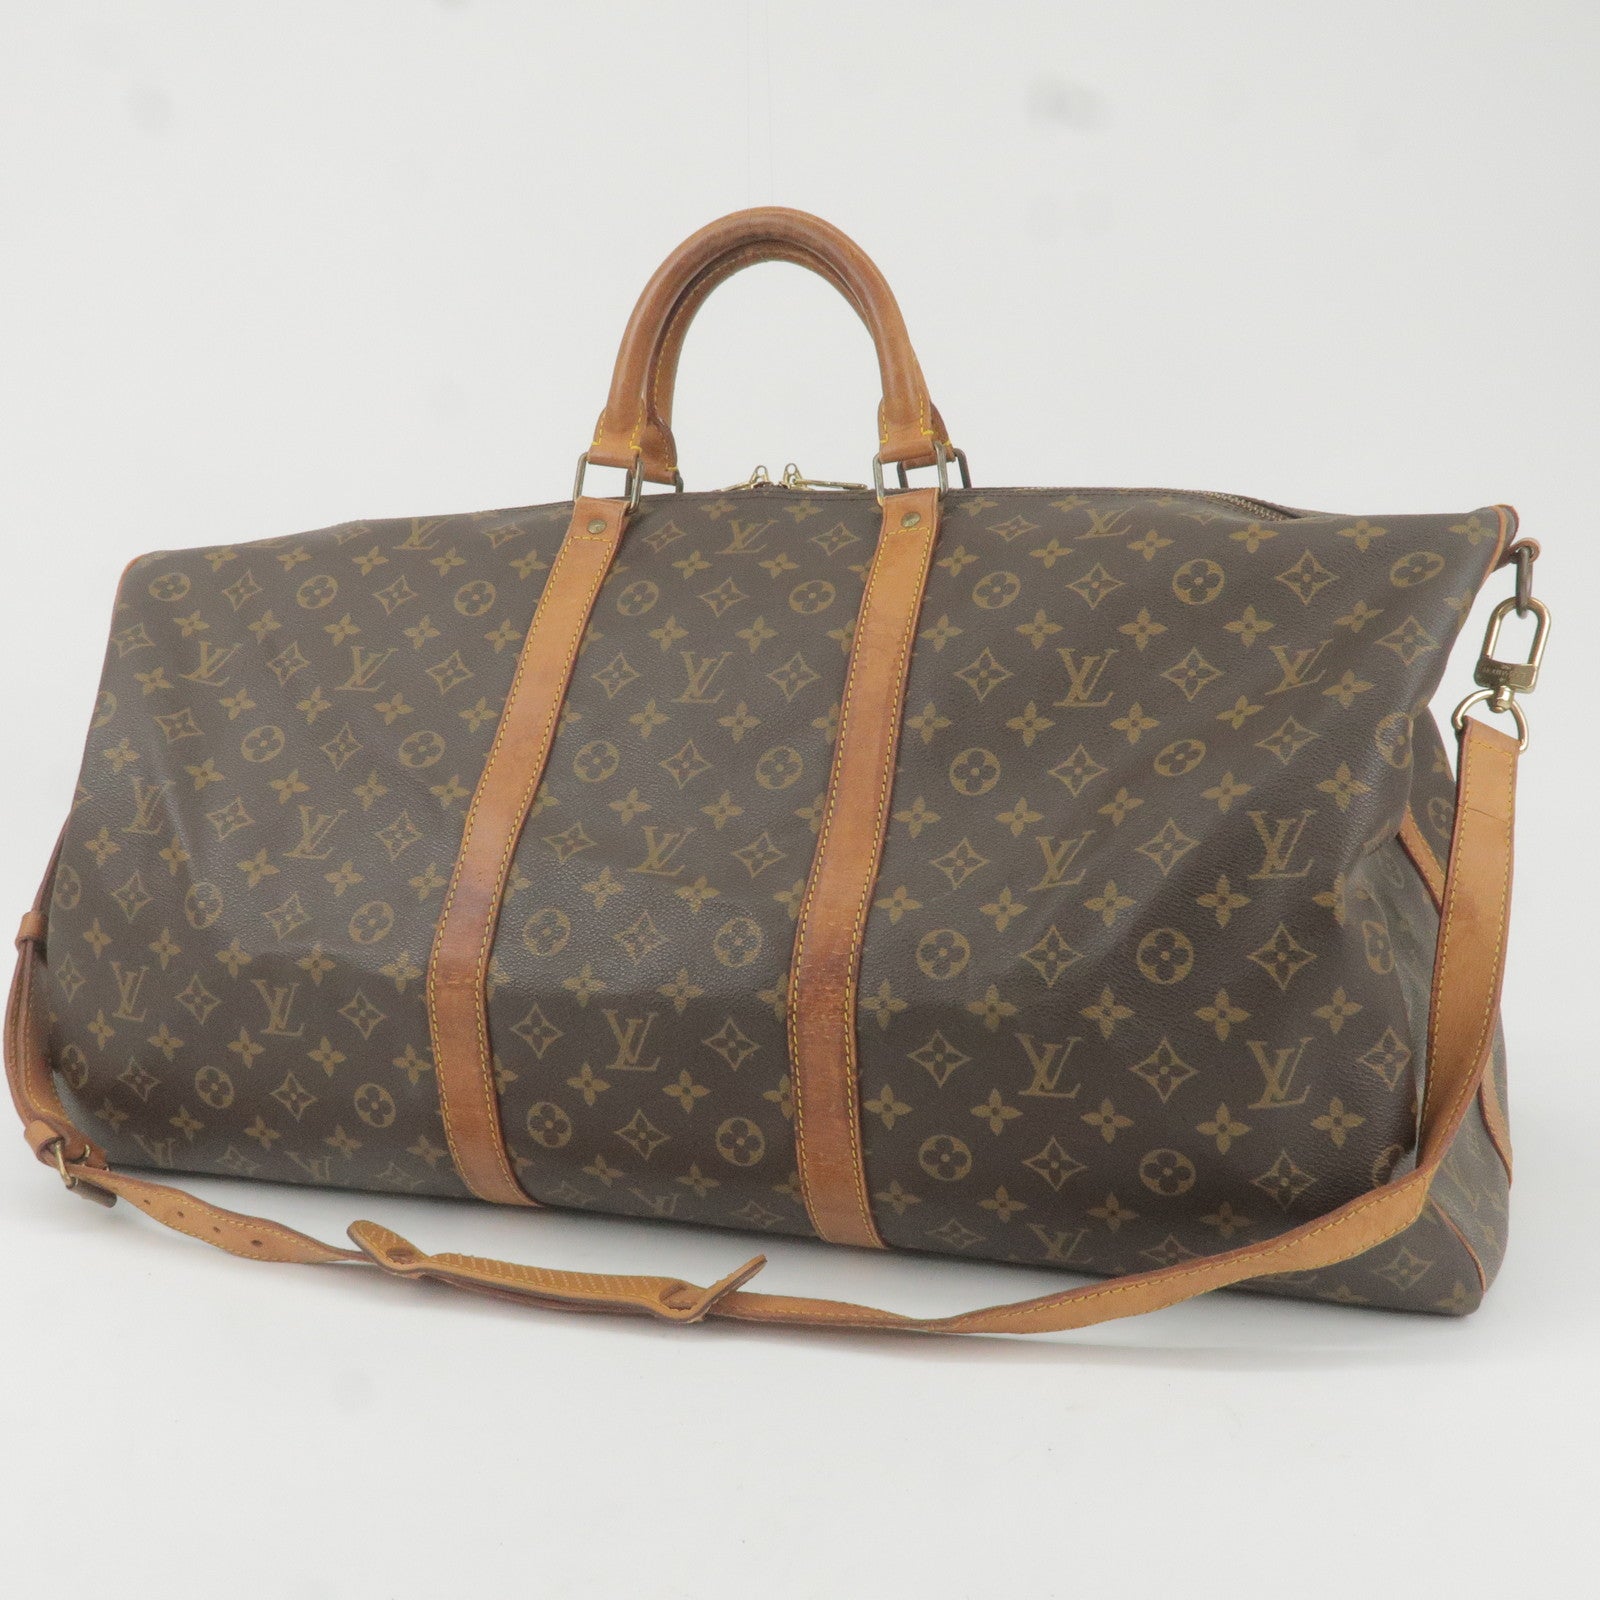 Louis Vuitton x Richard Prince 2008 pre-owned Papillon 30 holdall